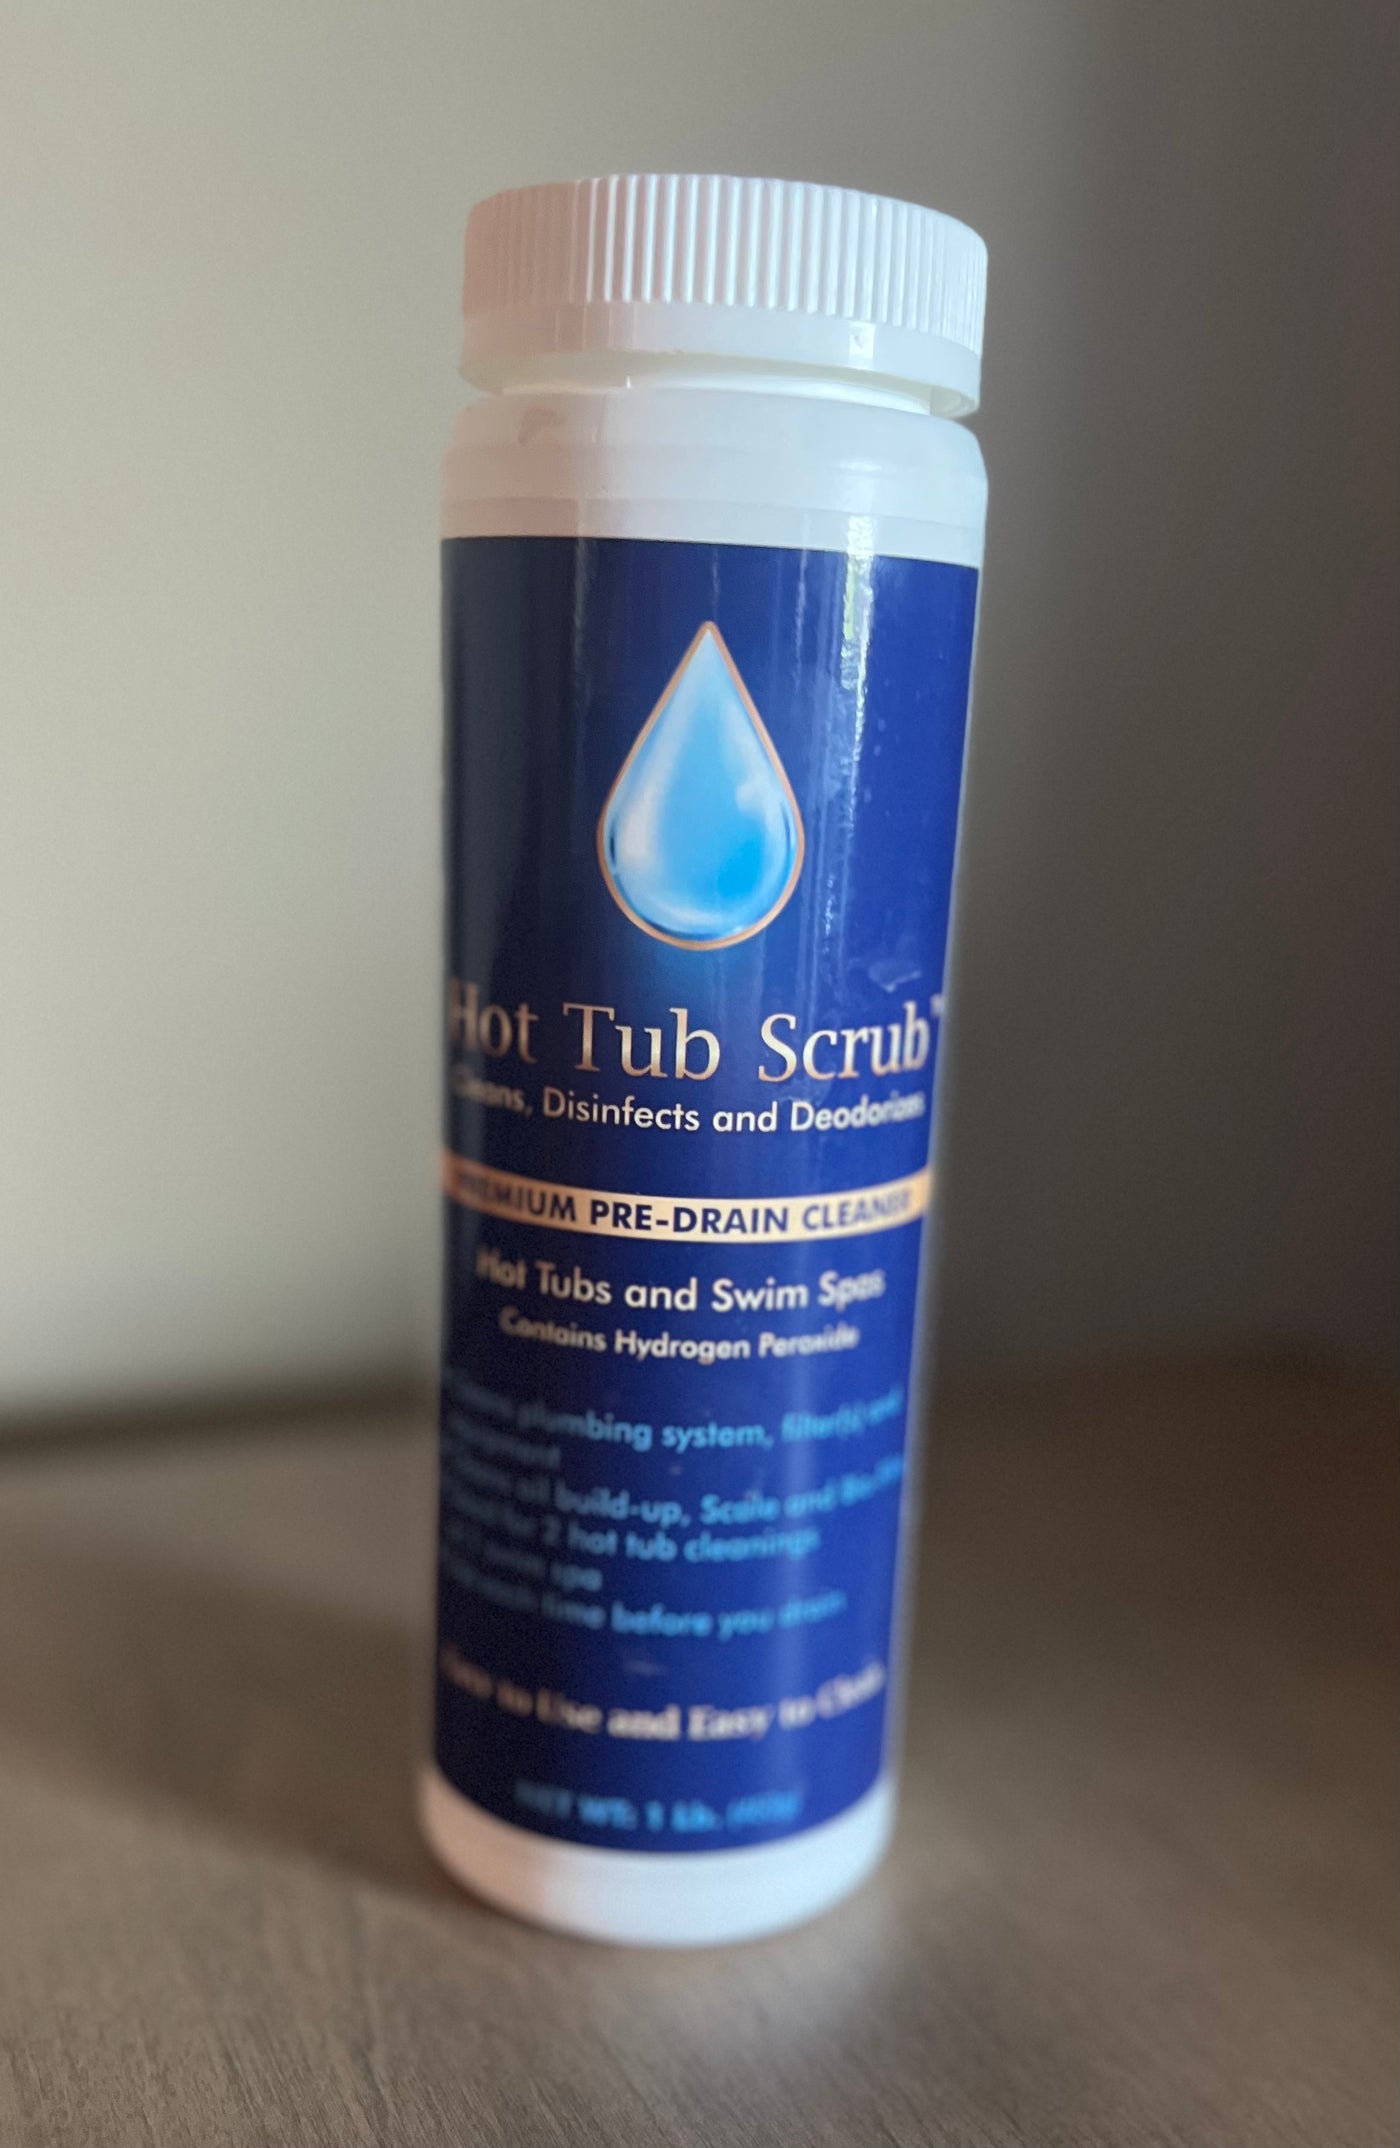 A bottle of  Hot Tub  Scrub sitting on a table  it is a blue lable with gold lettering and a blue water droplet